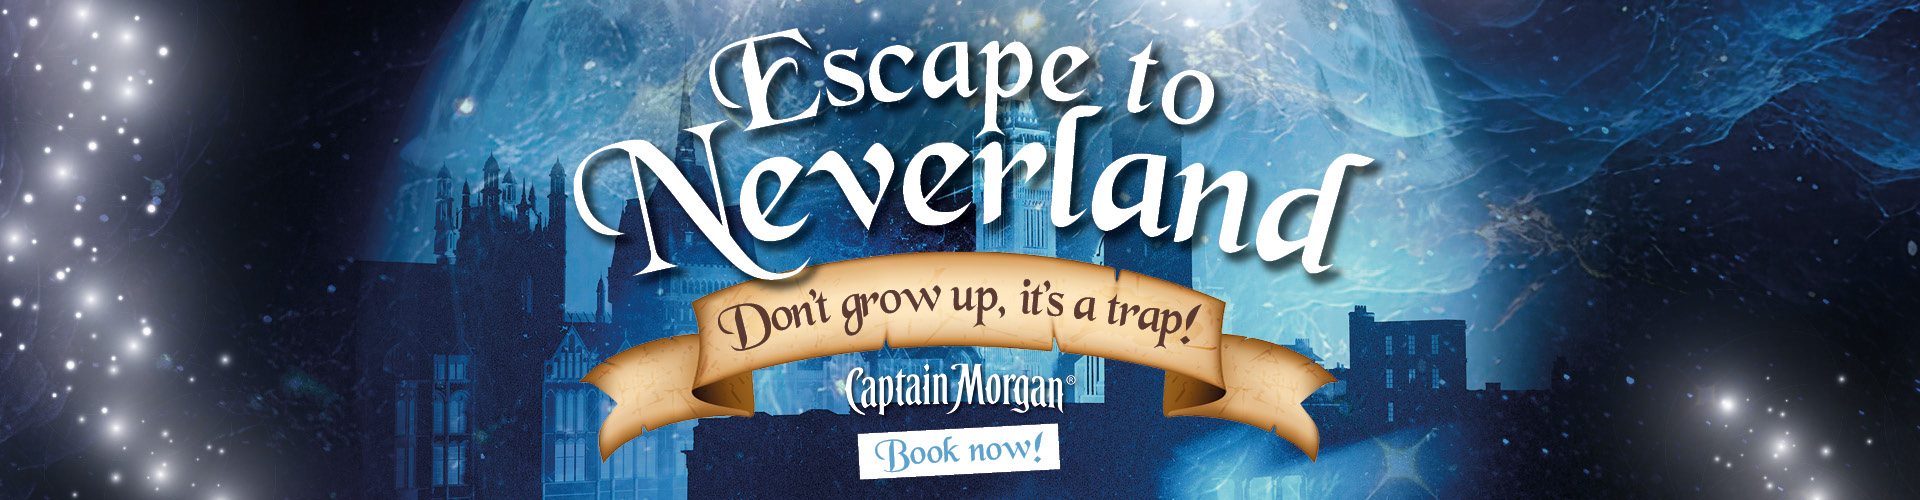 Escape to Neverland this NYE at Popworld Newcastle